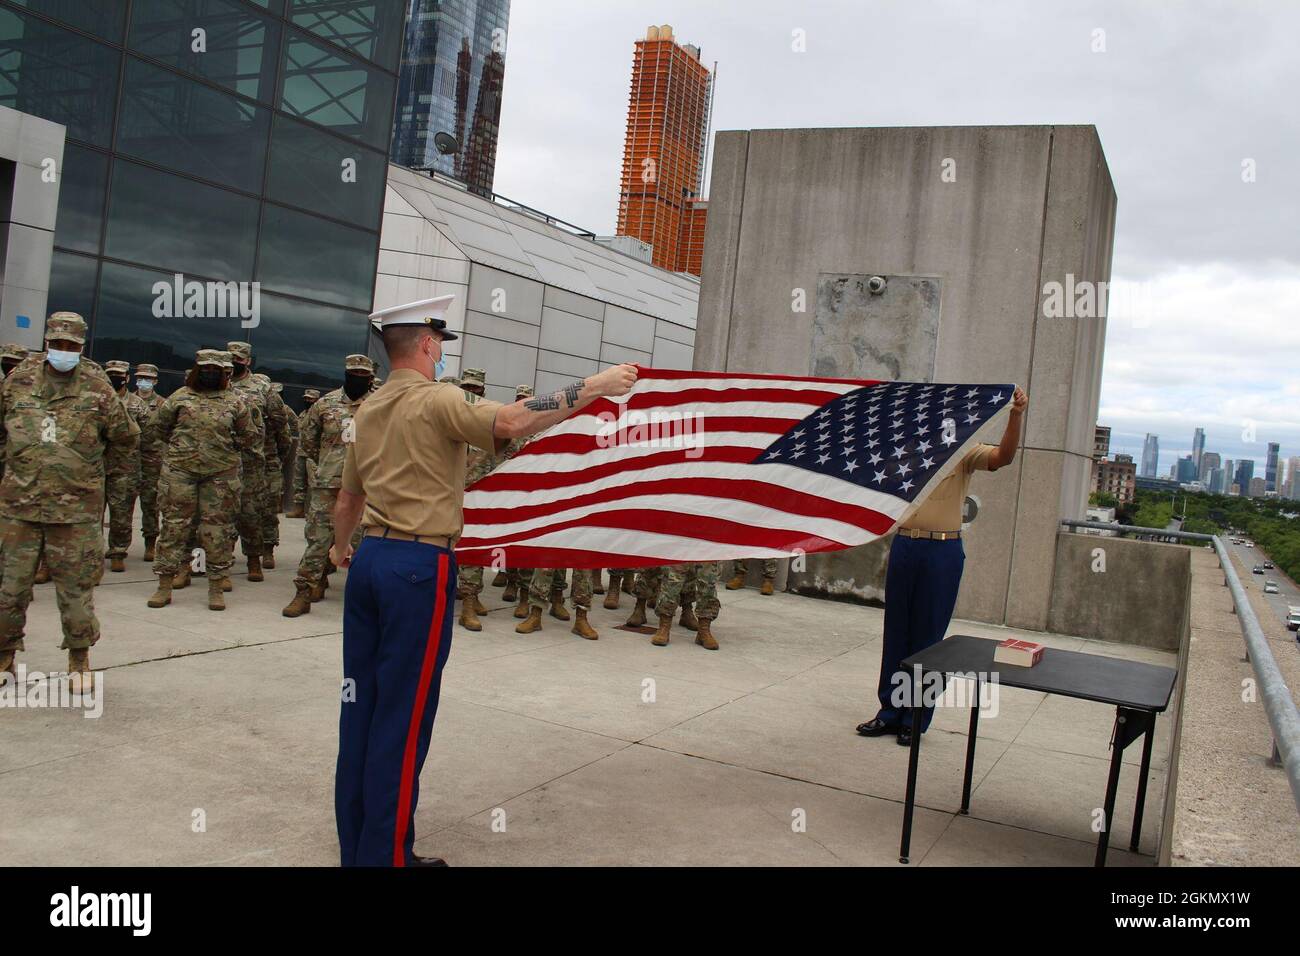 New York Naval Militia Service members (r) assigned to Joint Task Force Javits unfurl the American flag during a Memorial Day service held on the terrace of the Jacob K. Javits Center in Manhattan, New York on Monday May 31, 2021. Over 3,180 members of the New York Army and Air National Guard, the New York Naval Militia and the New York Guard are supporting the multi-agency response to COVID-19 at 24 vaccination sites and other locations across New York. Stock Photo